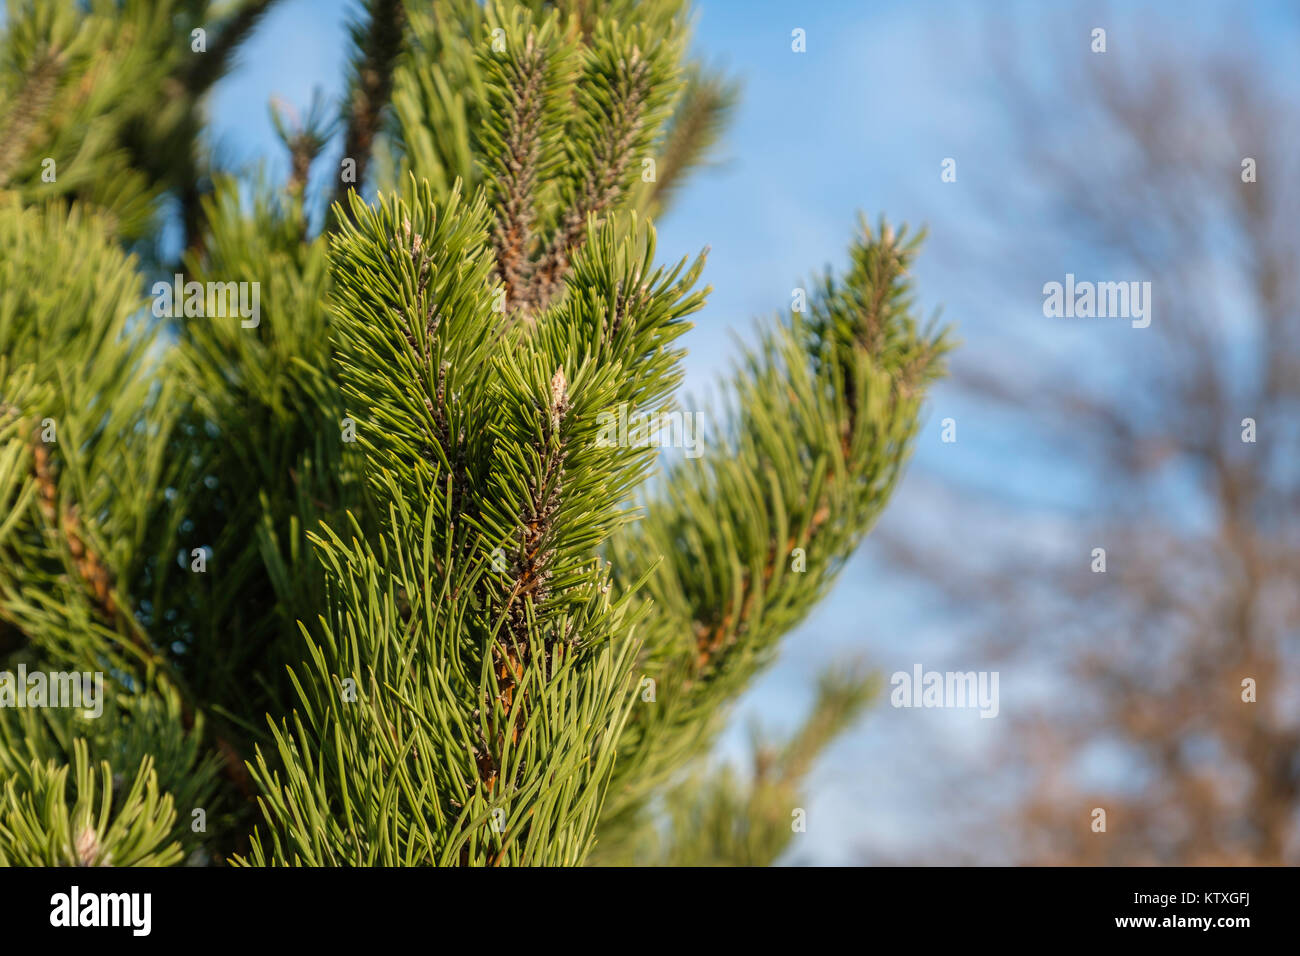 Closeup of branches and needles of scotch pine or scots pine, Pinus sylvestris, young tree in an urban environment. Oklahoma City, Oklahoma, USA. Stock Photo